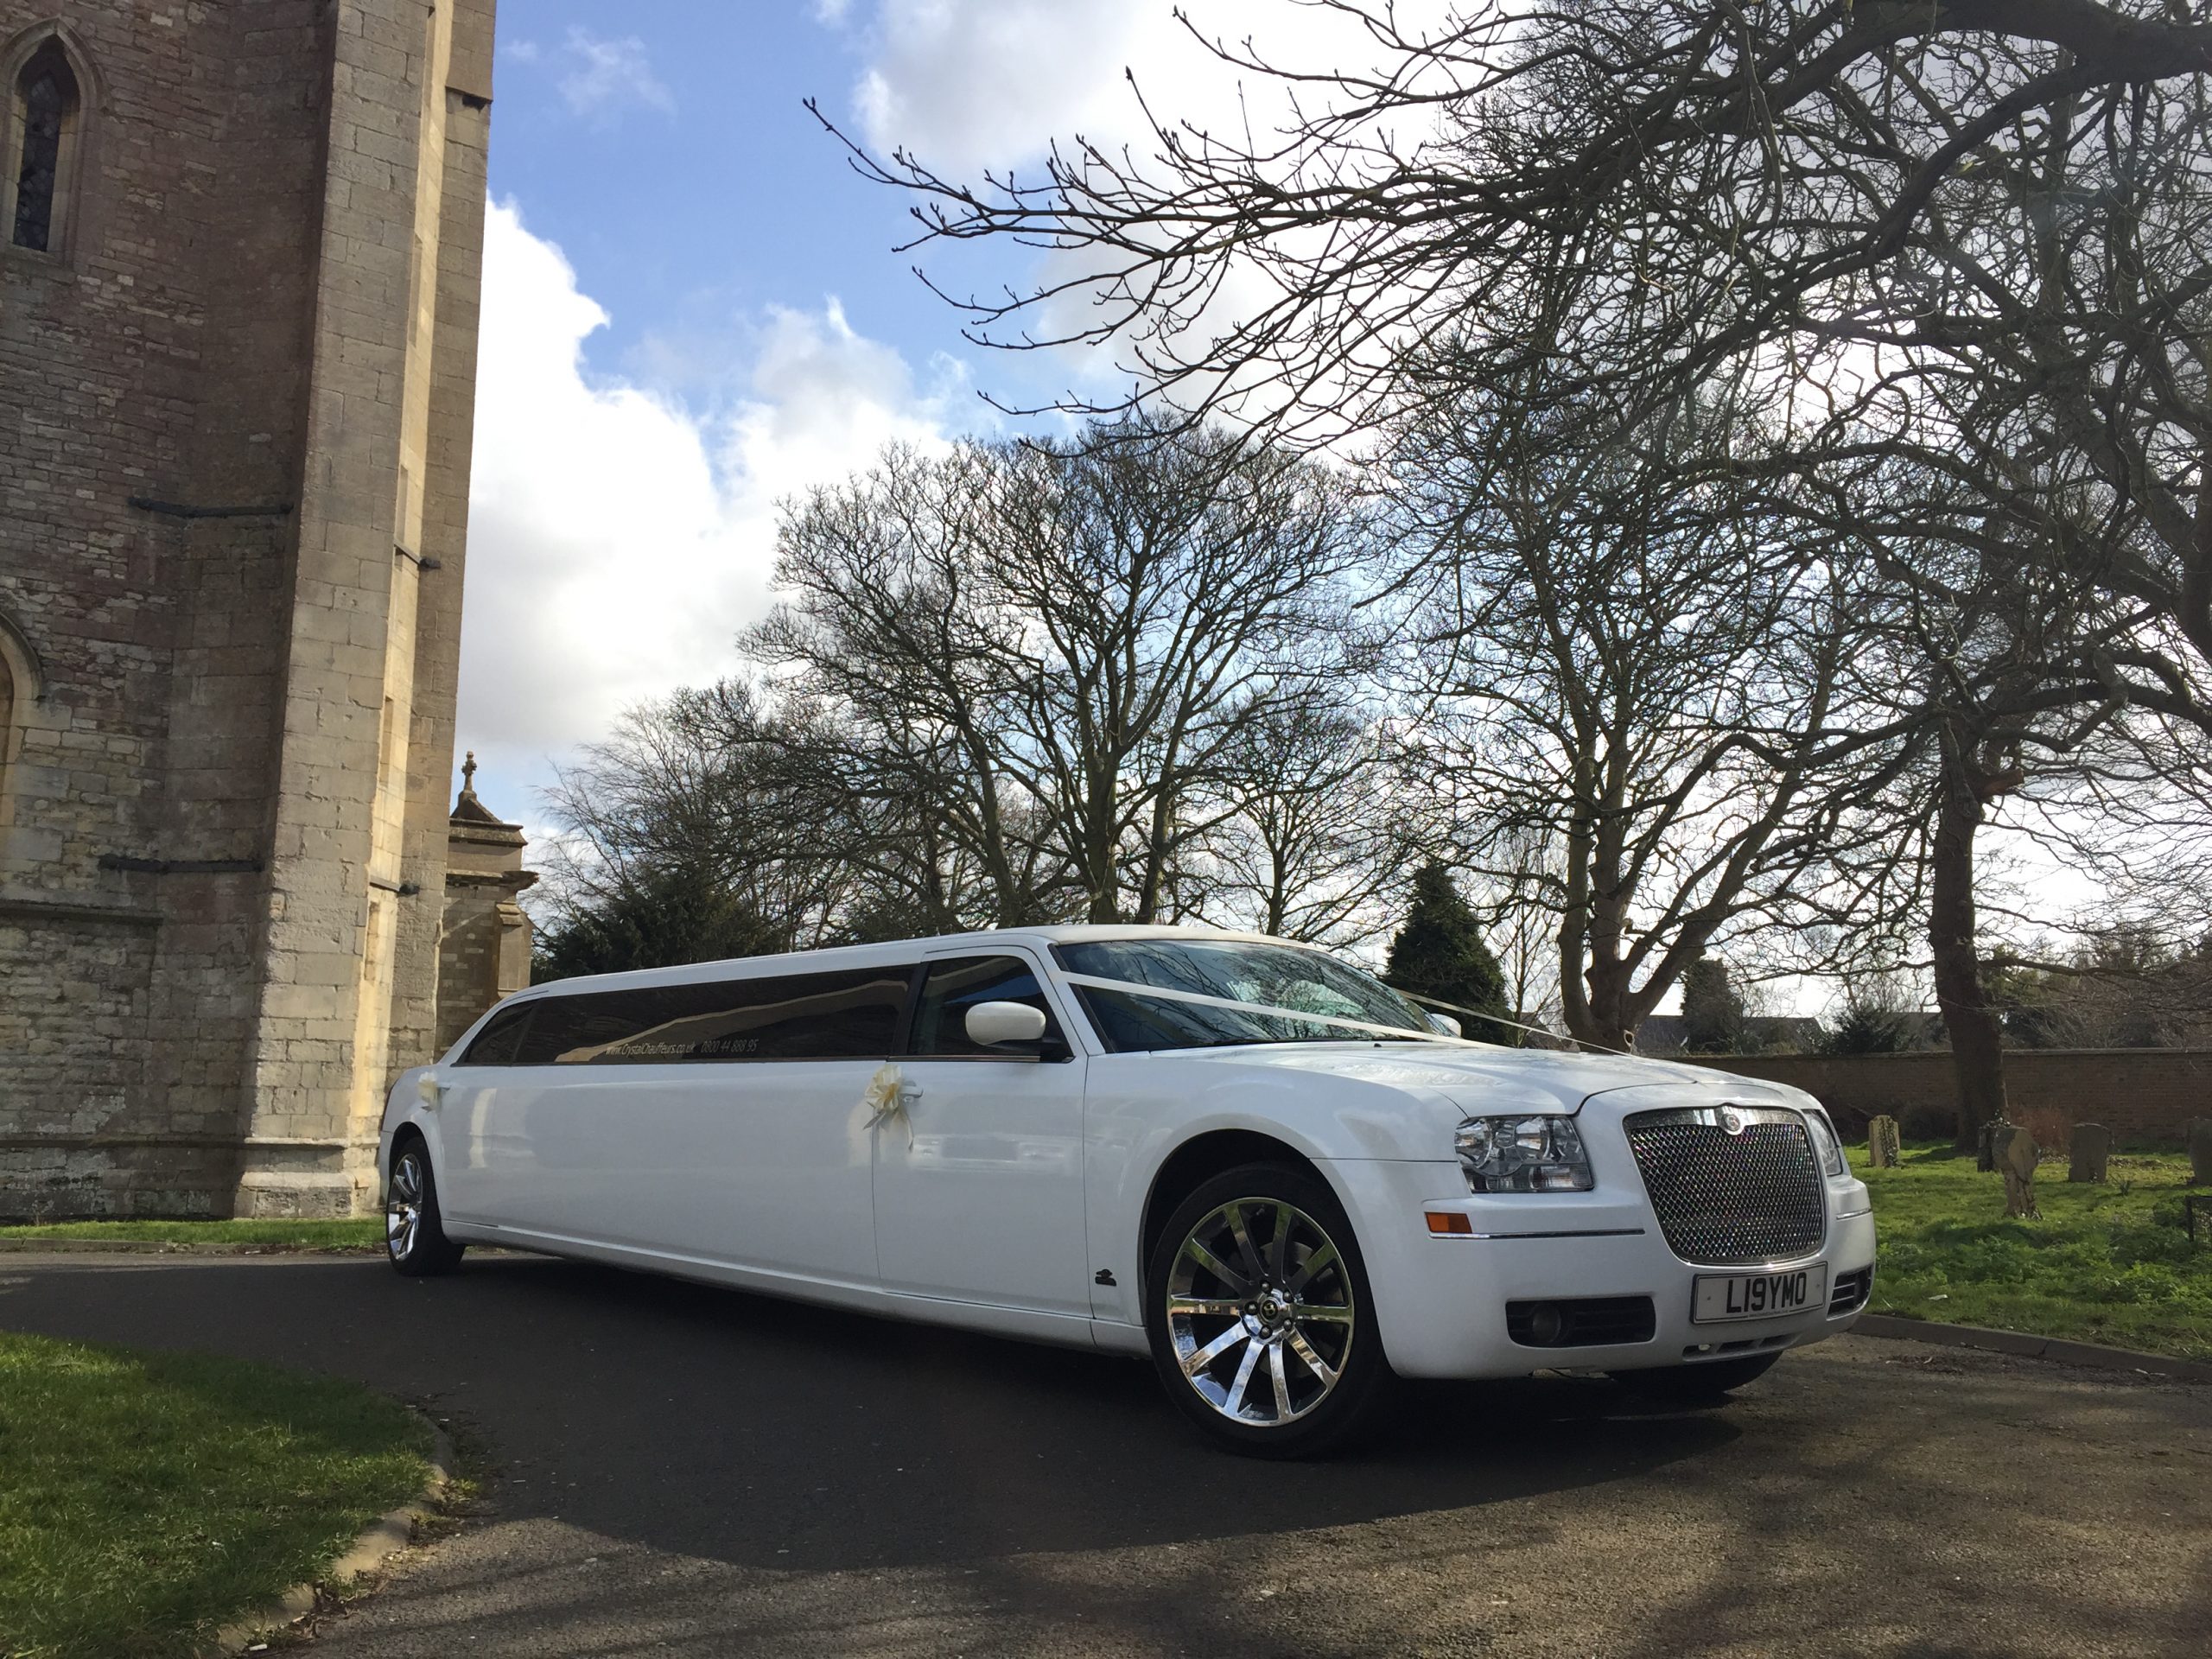 Wedding Limo Hire Bedfordshire